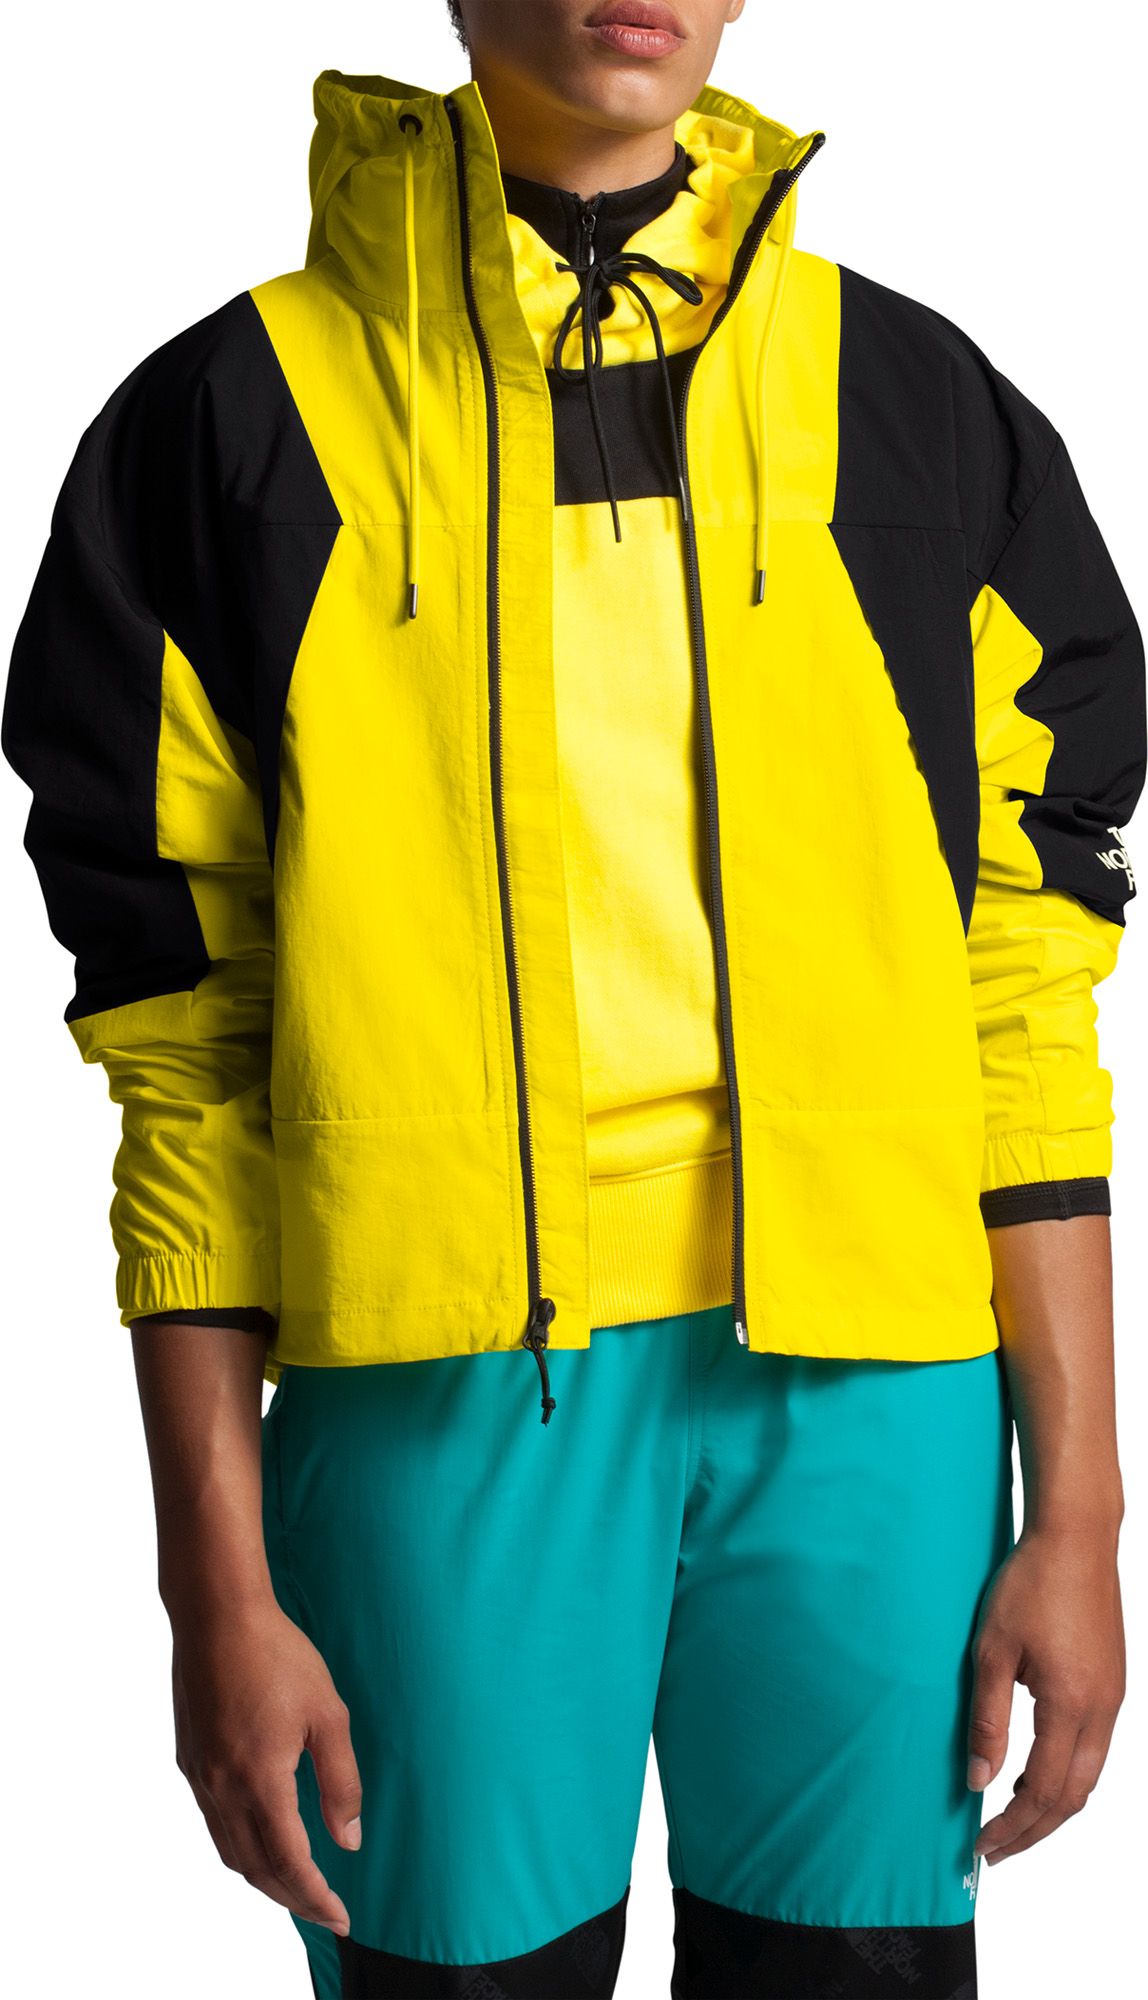 north face wind jacket women's